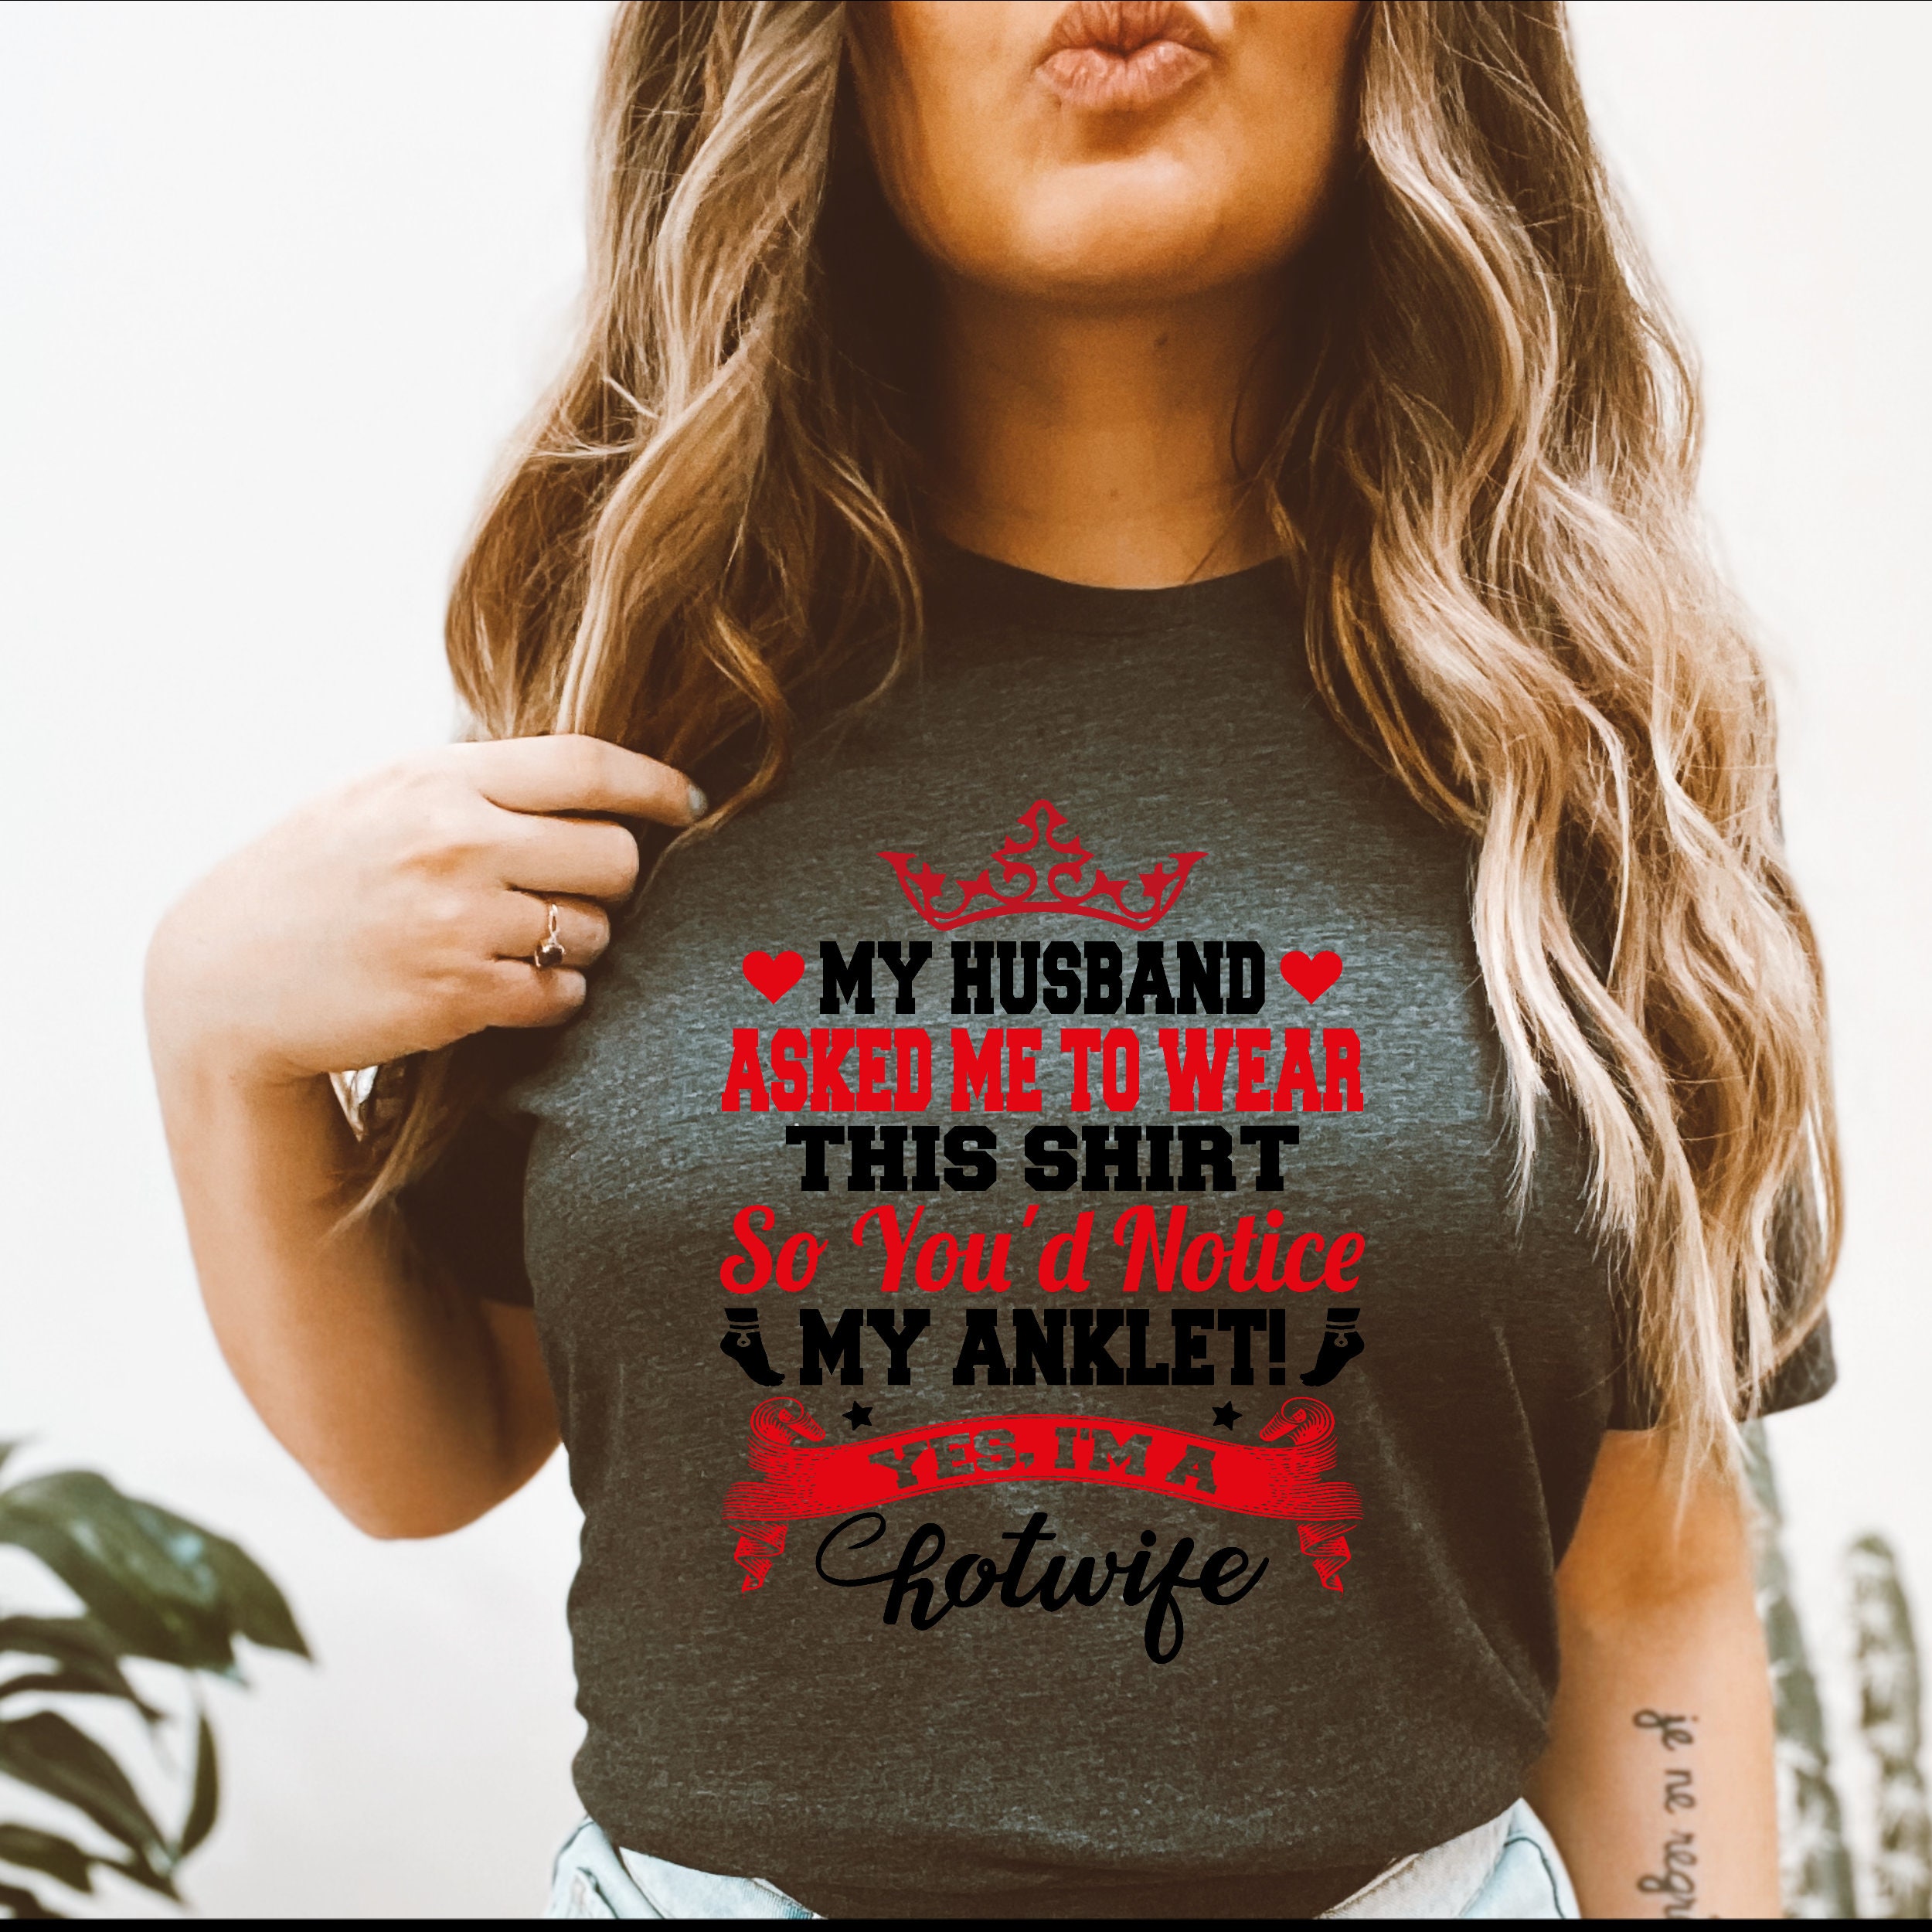 Hotwife T-shirt/sexy Gifts for Him/wife photo pic